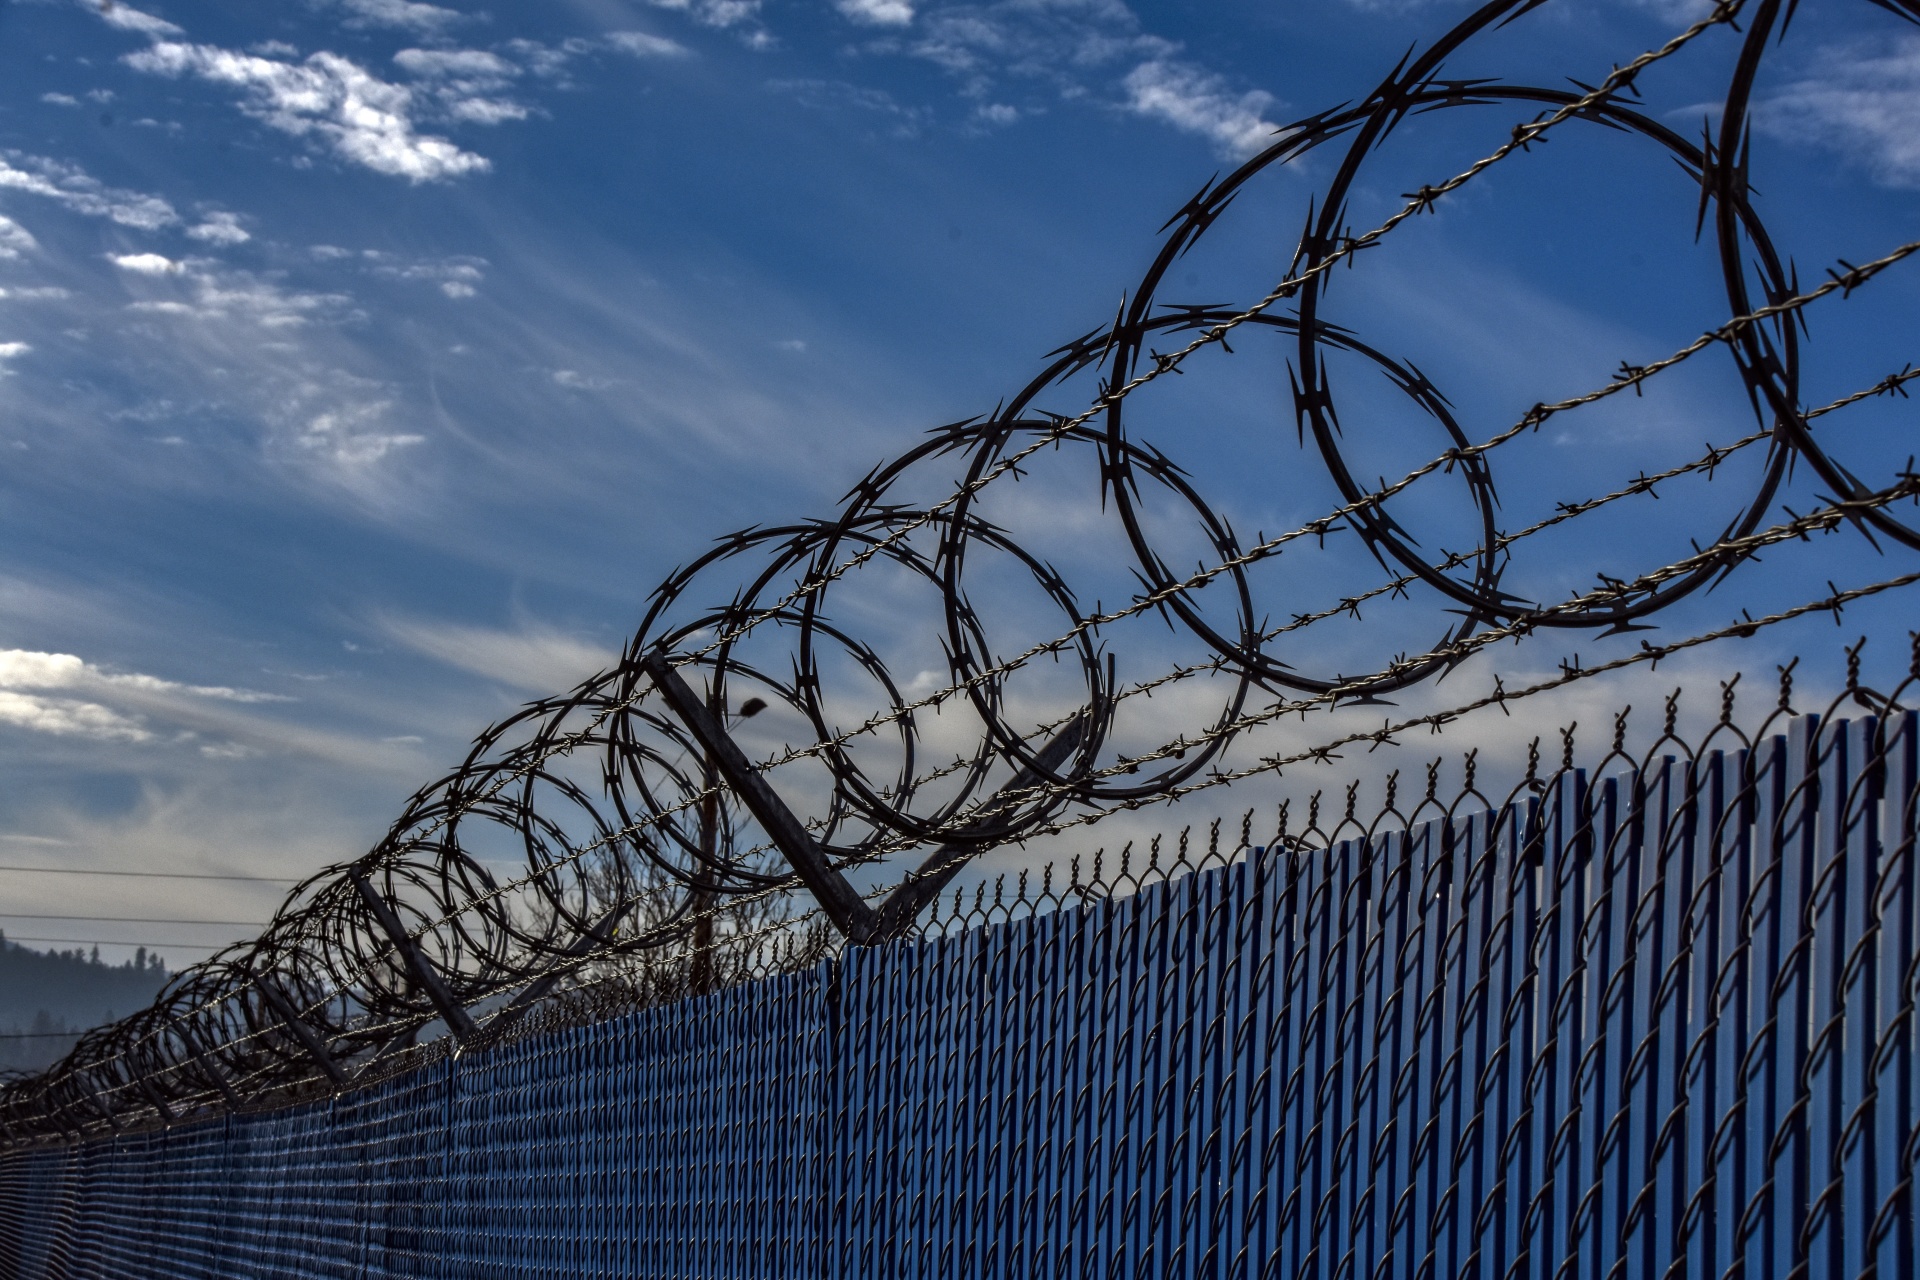 circular barbed wire fence with blue sky and clouds in background